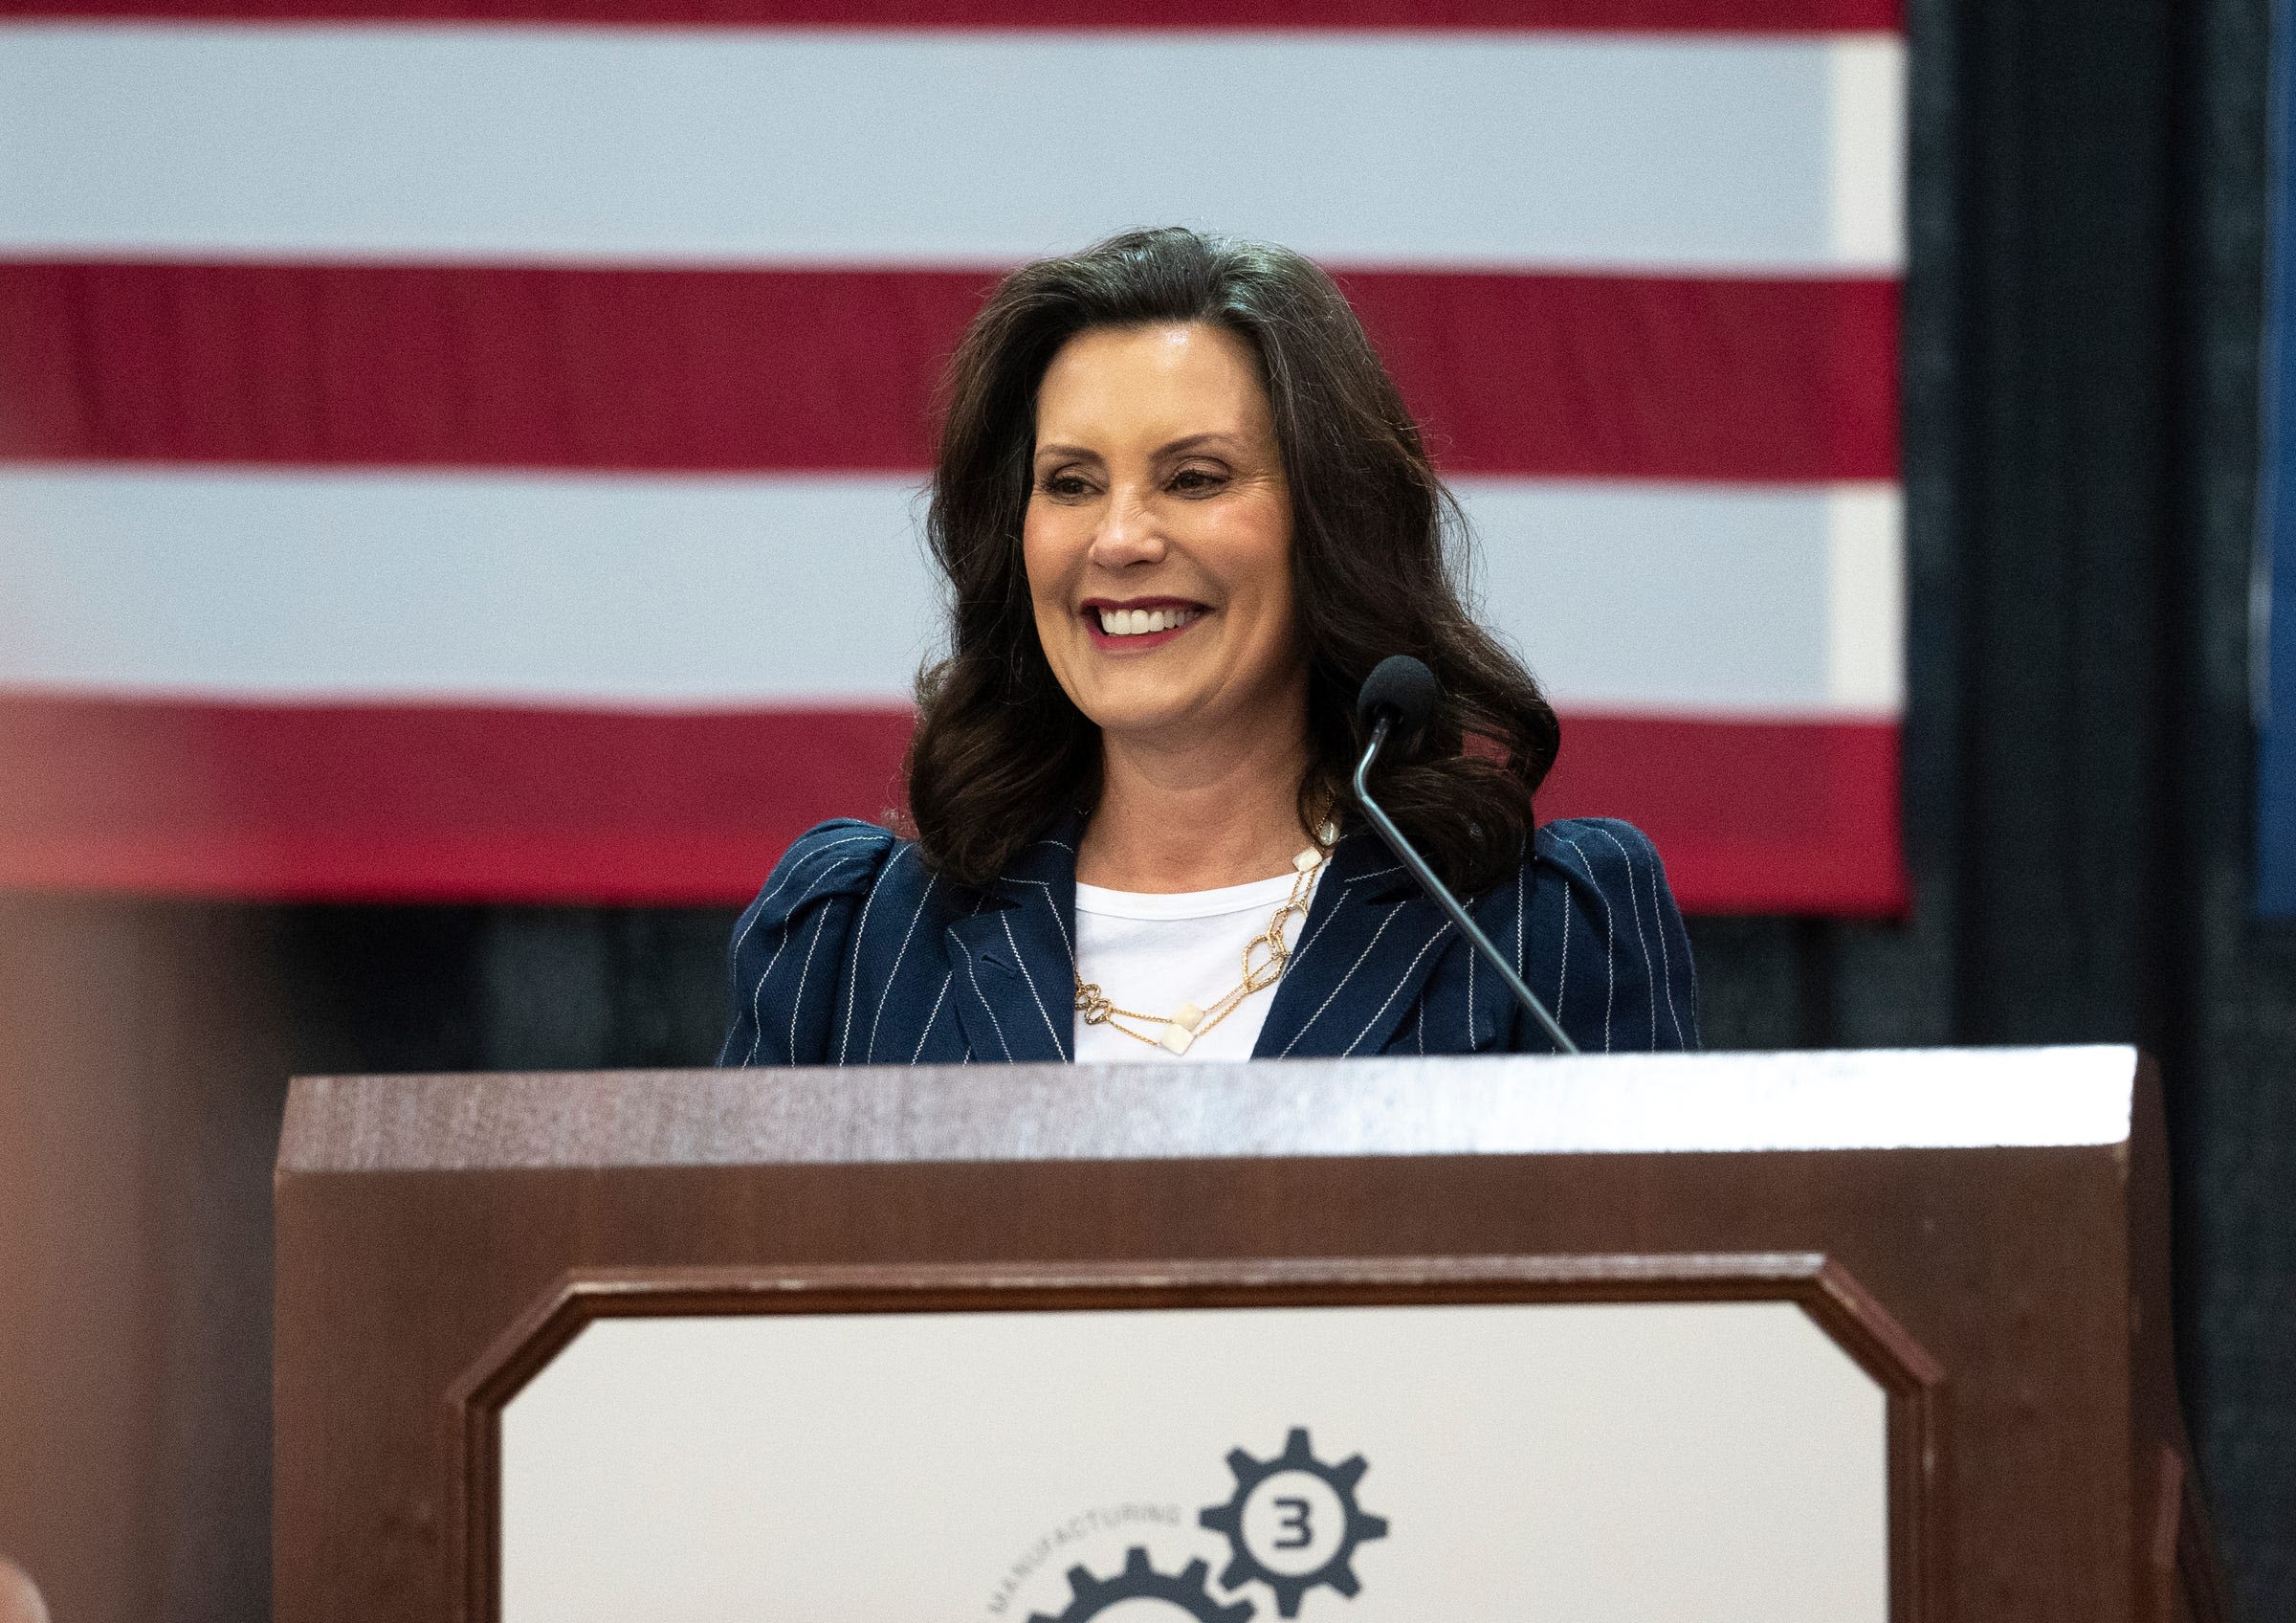 Gov. Whitmer signs $23.4B education budget into law. Here's what's in it.